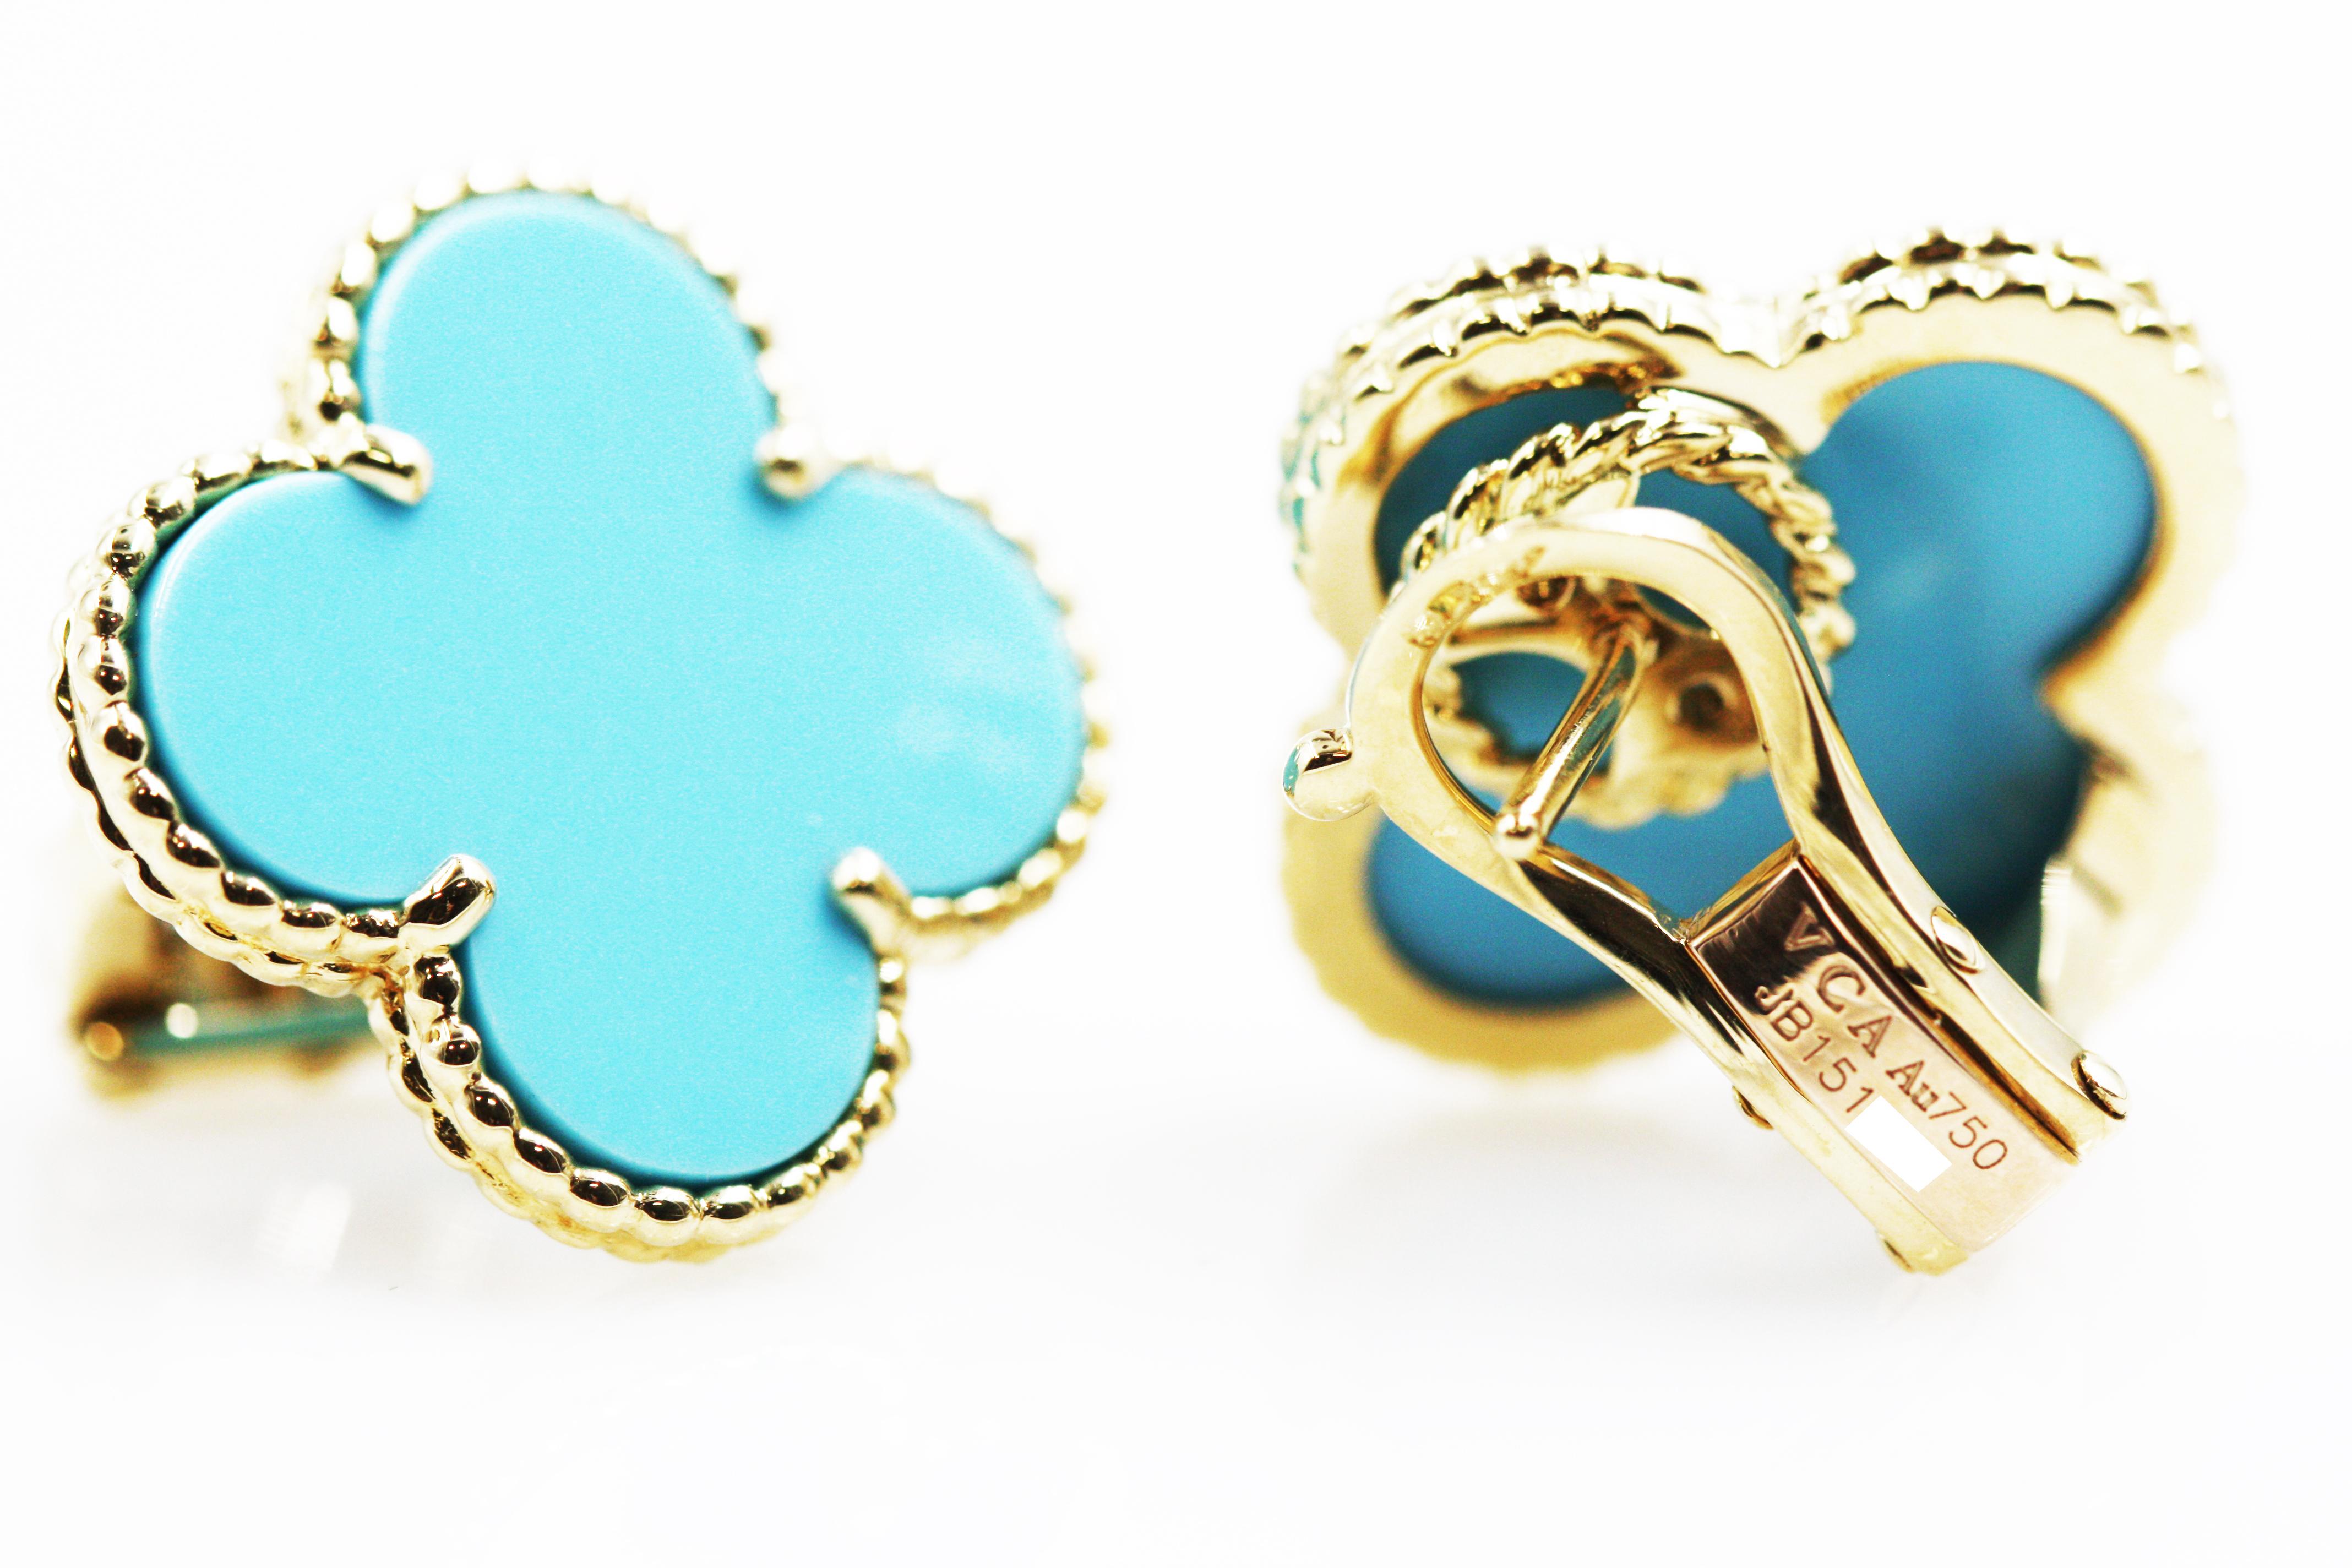 Material: 18k Yellow Gold
Gemstones: Sleeping Beauty Turquoise in the shape of a clover. Turquoise Measures 1.9cm
Total Weight: 11.2g
This item will come with a box and certificate.
